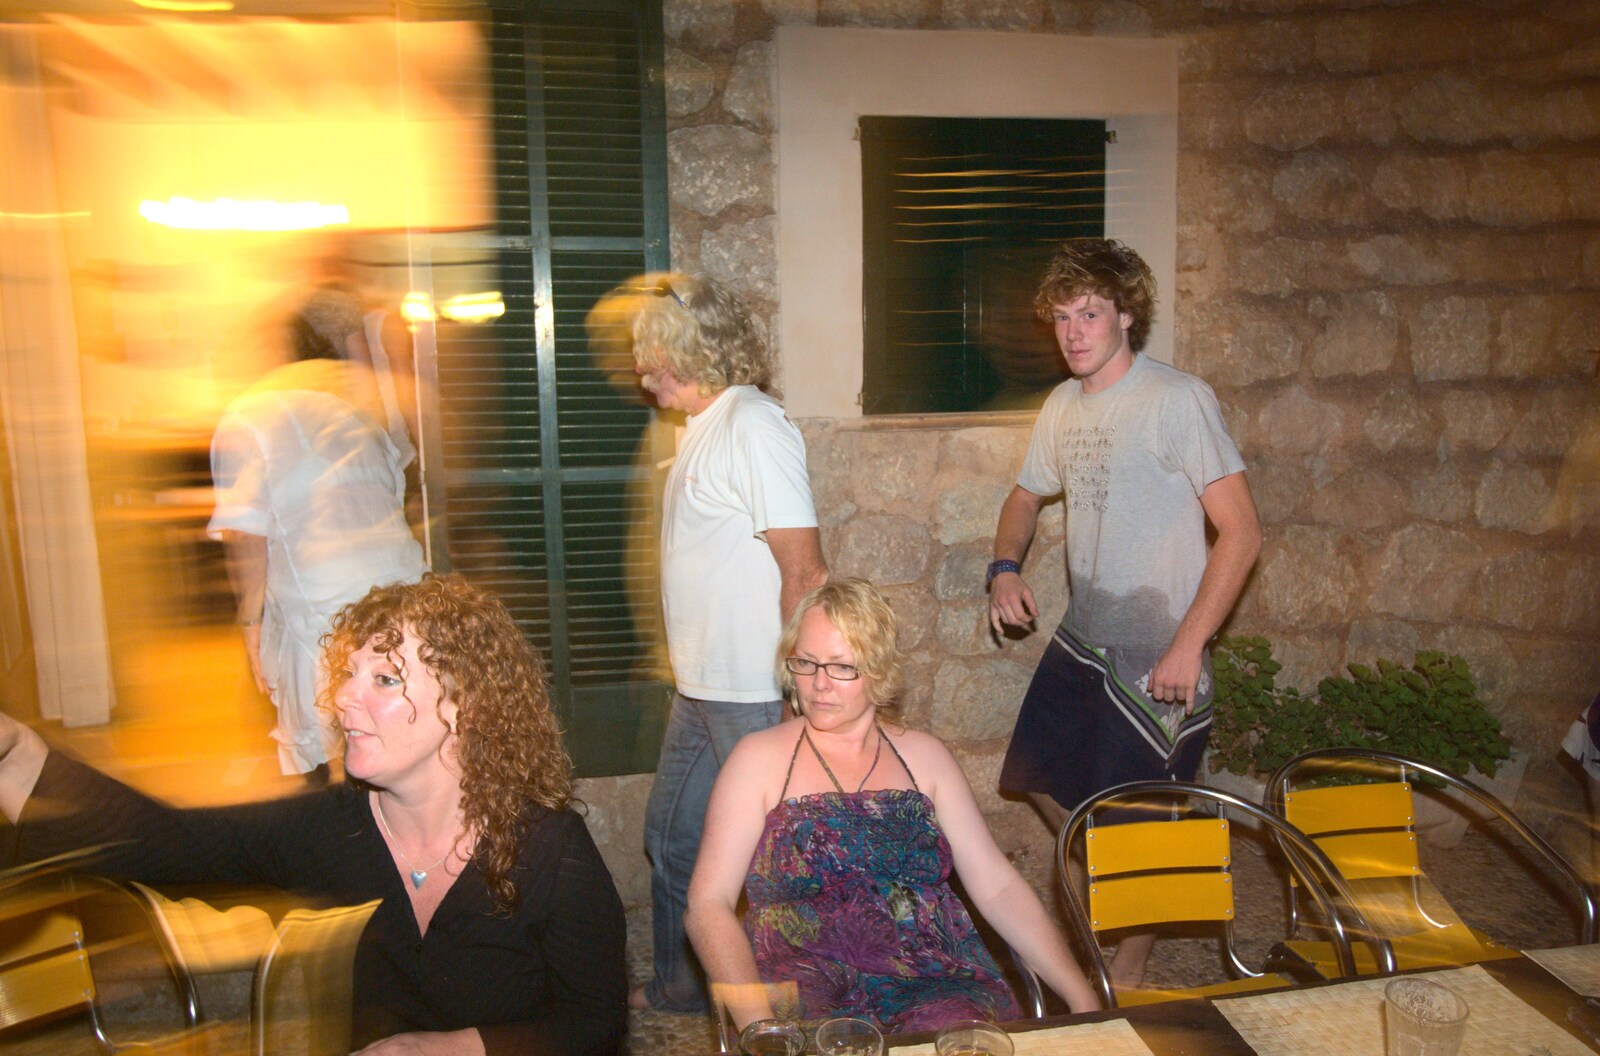 It's another night on the patio from A Tram Trip to Port Soller, Mallorca - 18th August 2011